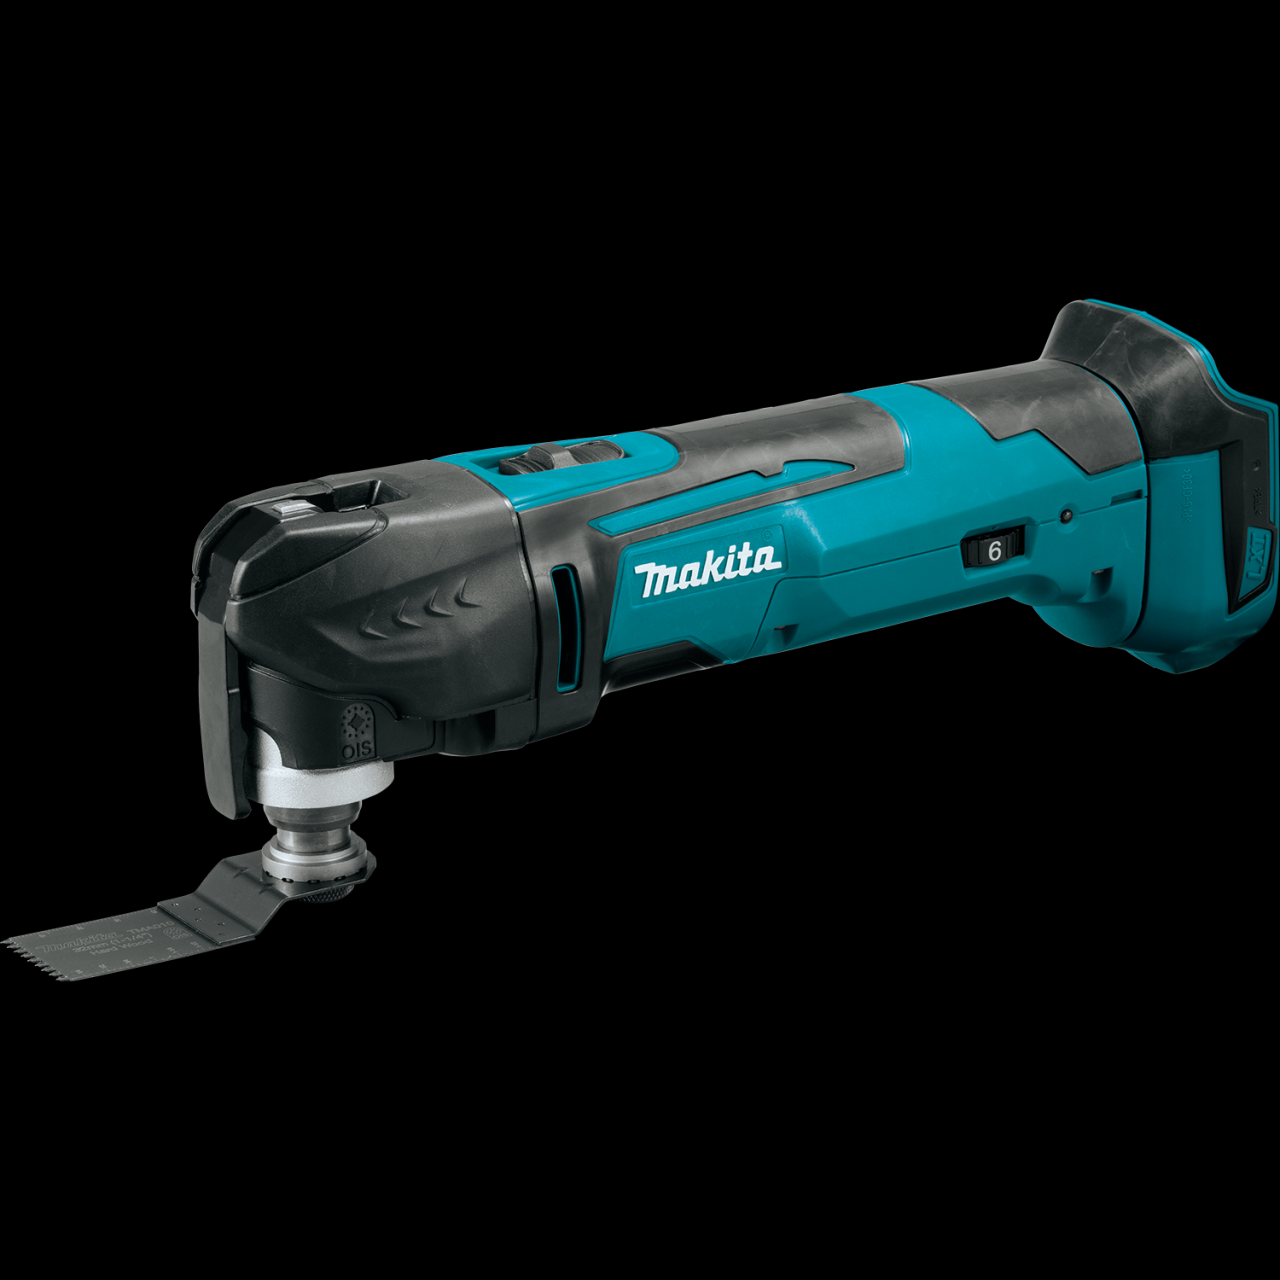 Makita USA - Product Details -XMT03Z